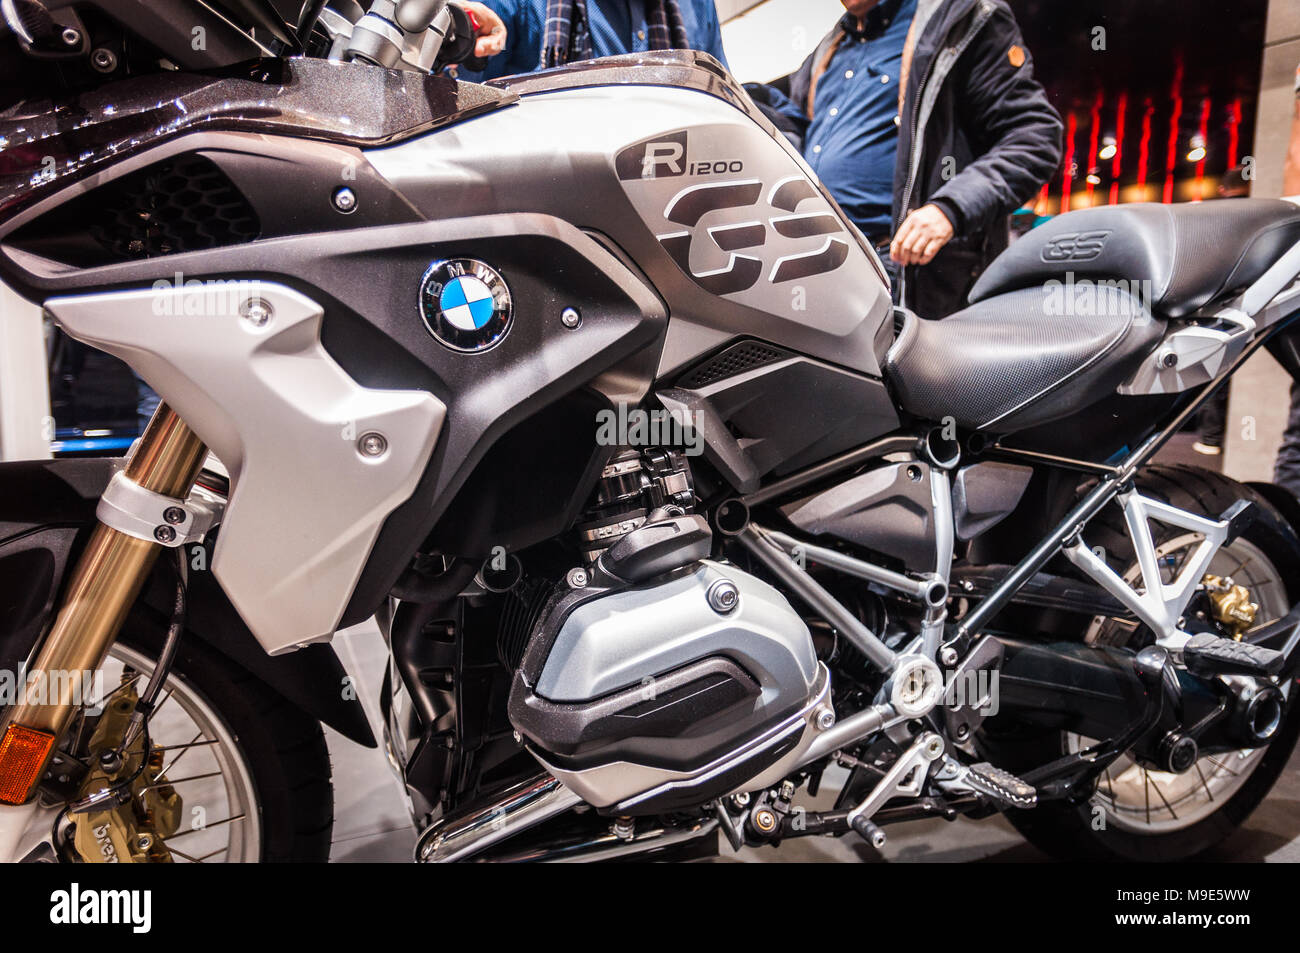 Bmw Gs 1200 High Resolution Stock Photography and Images - Alamy